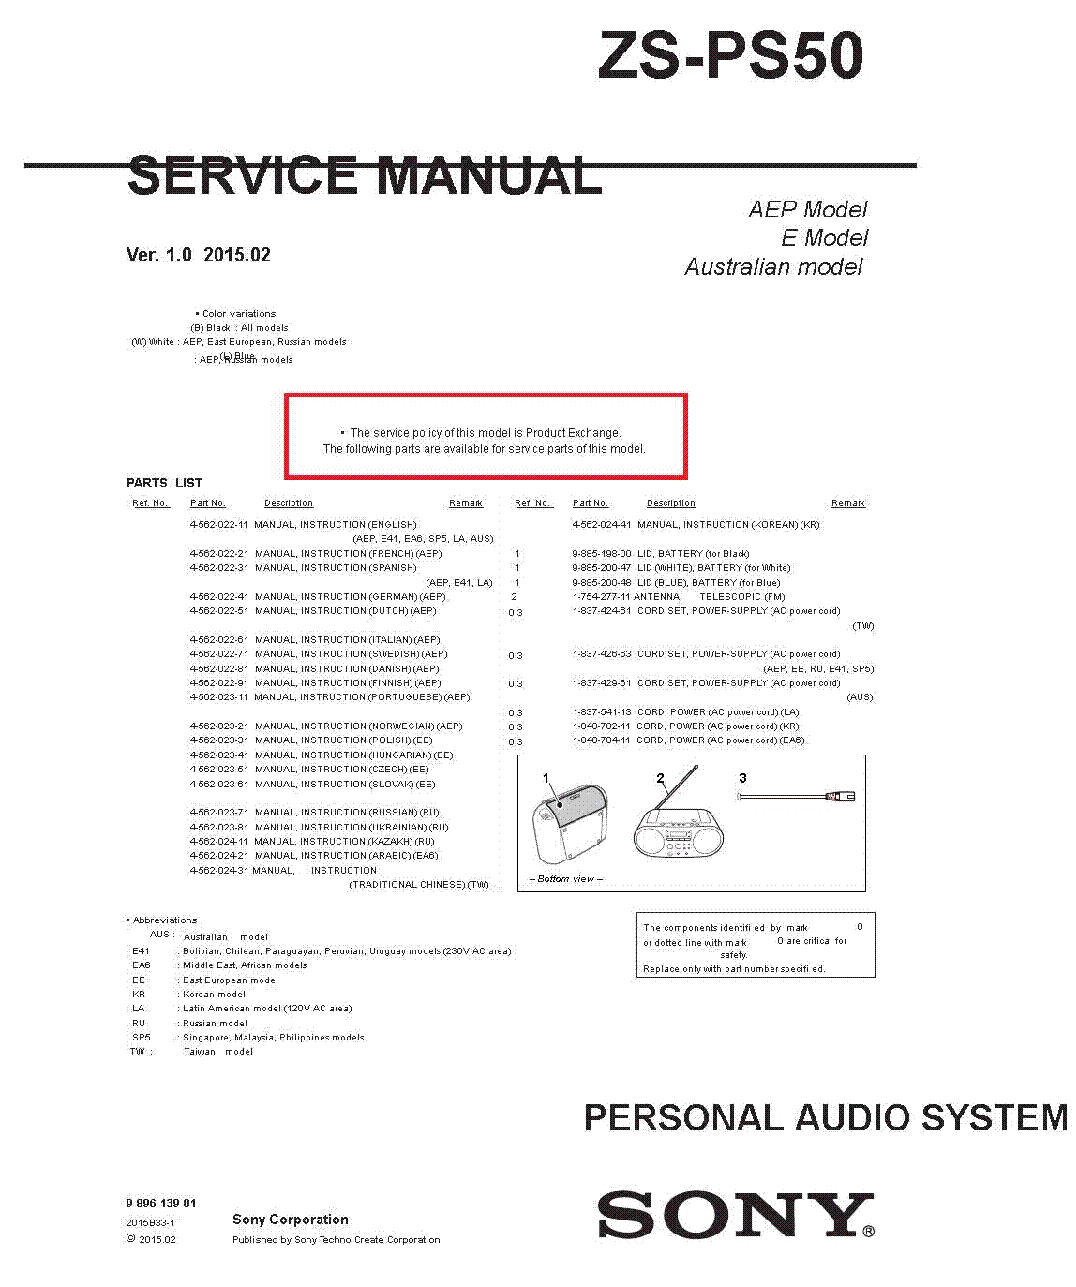 SONY ZS-PS50 VER.1.0 PART LIST service manual (1st page)